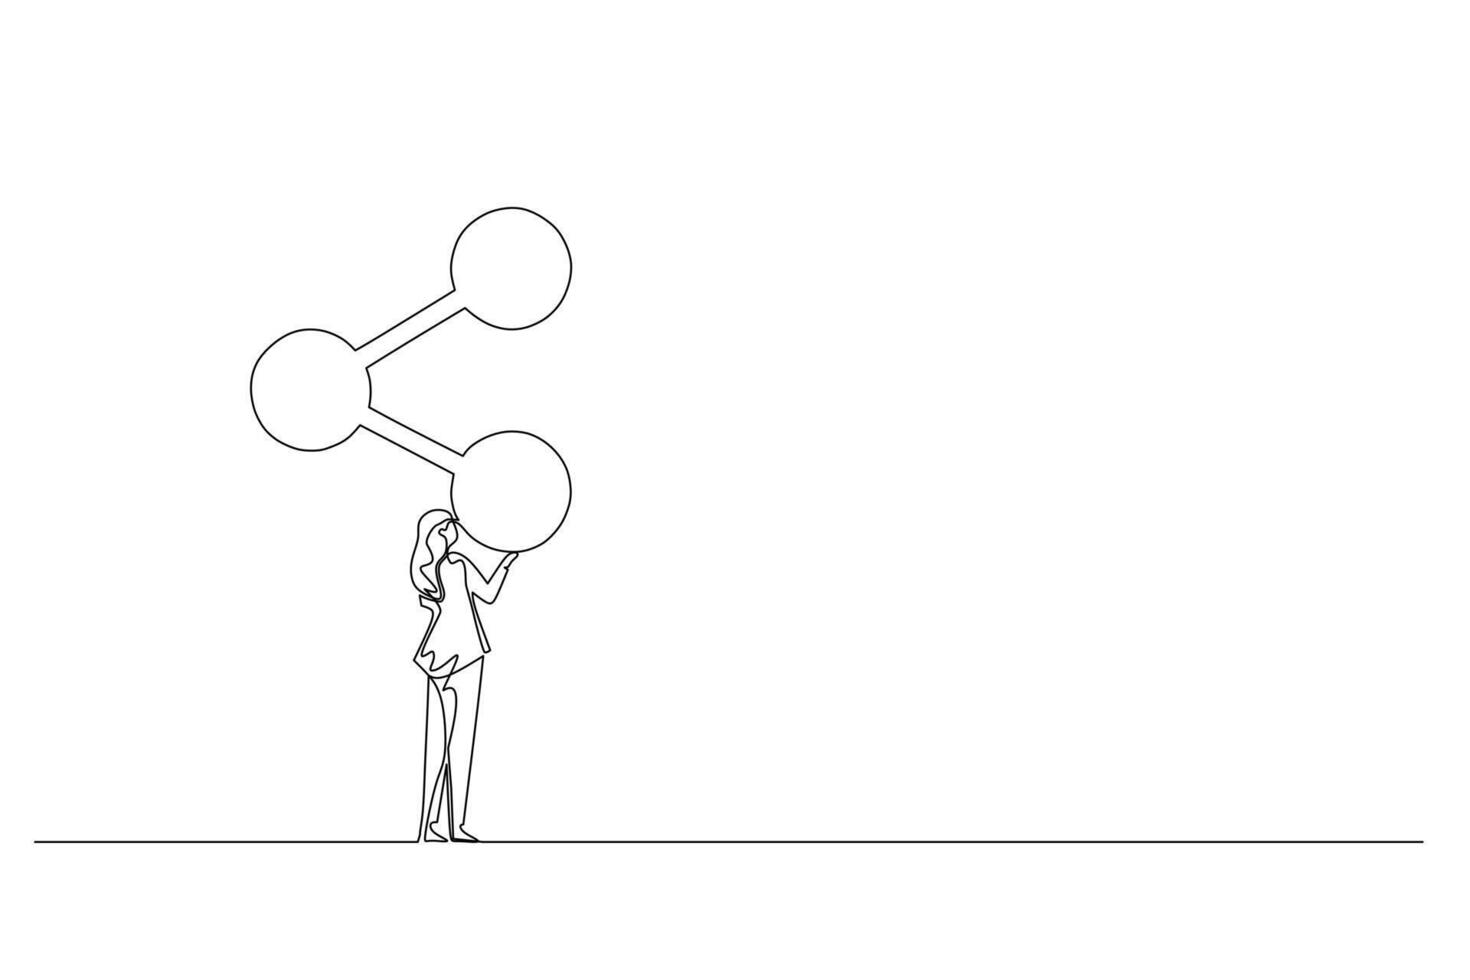 Continuous line drawing of a young female analyzing molecular structure. Woman in suit looking a at chemical diagram. Business person studies complex compounds for success vector illustration.